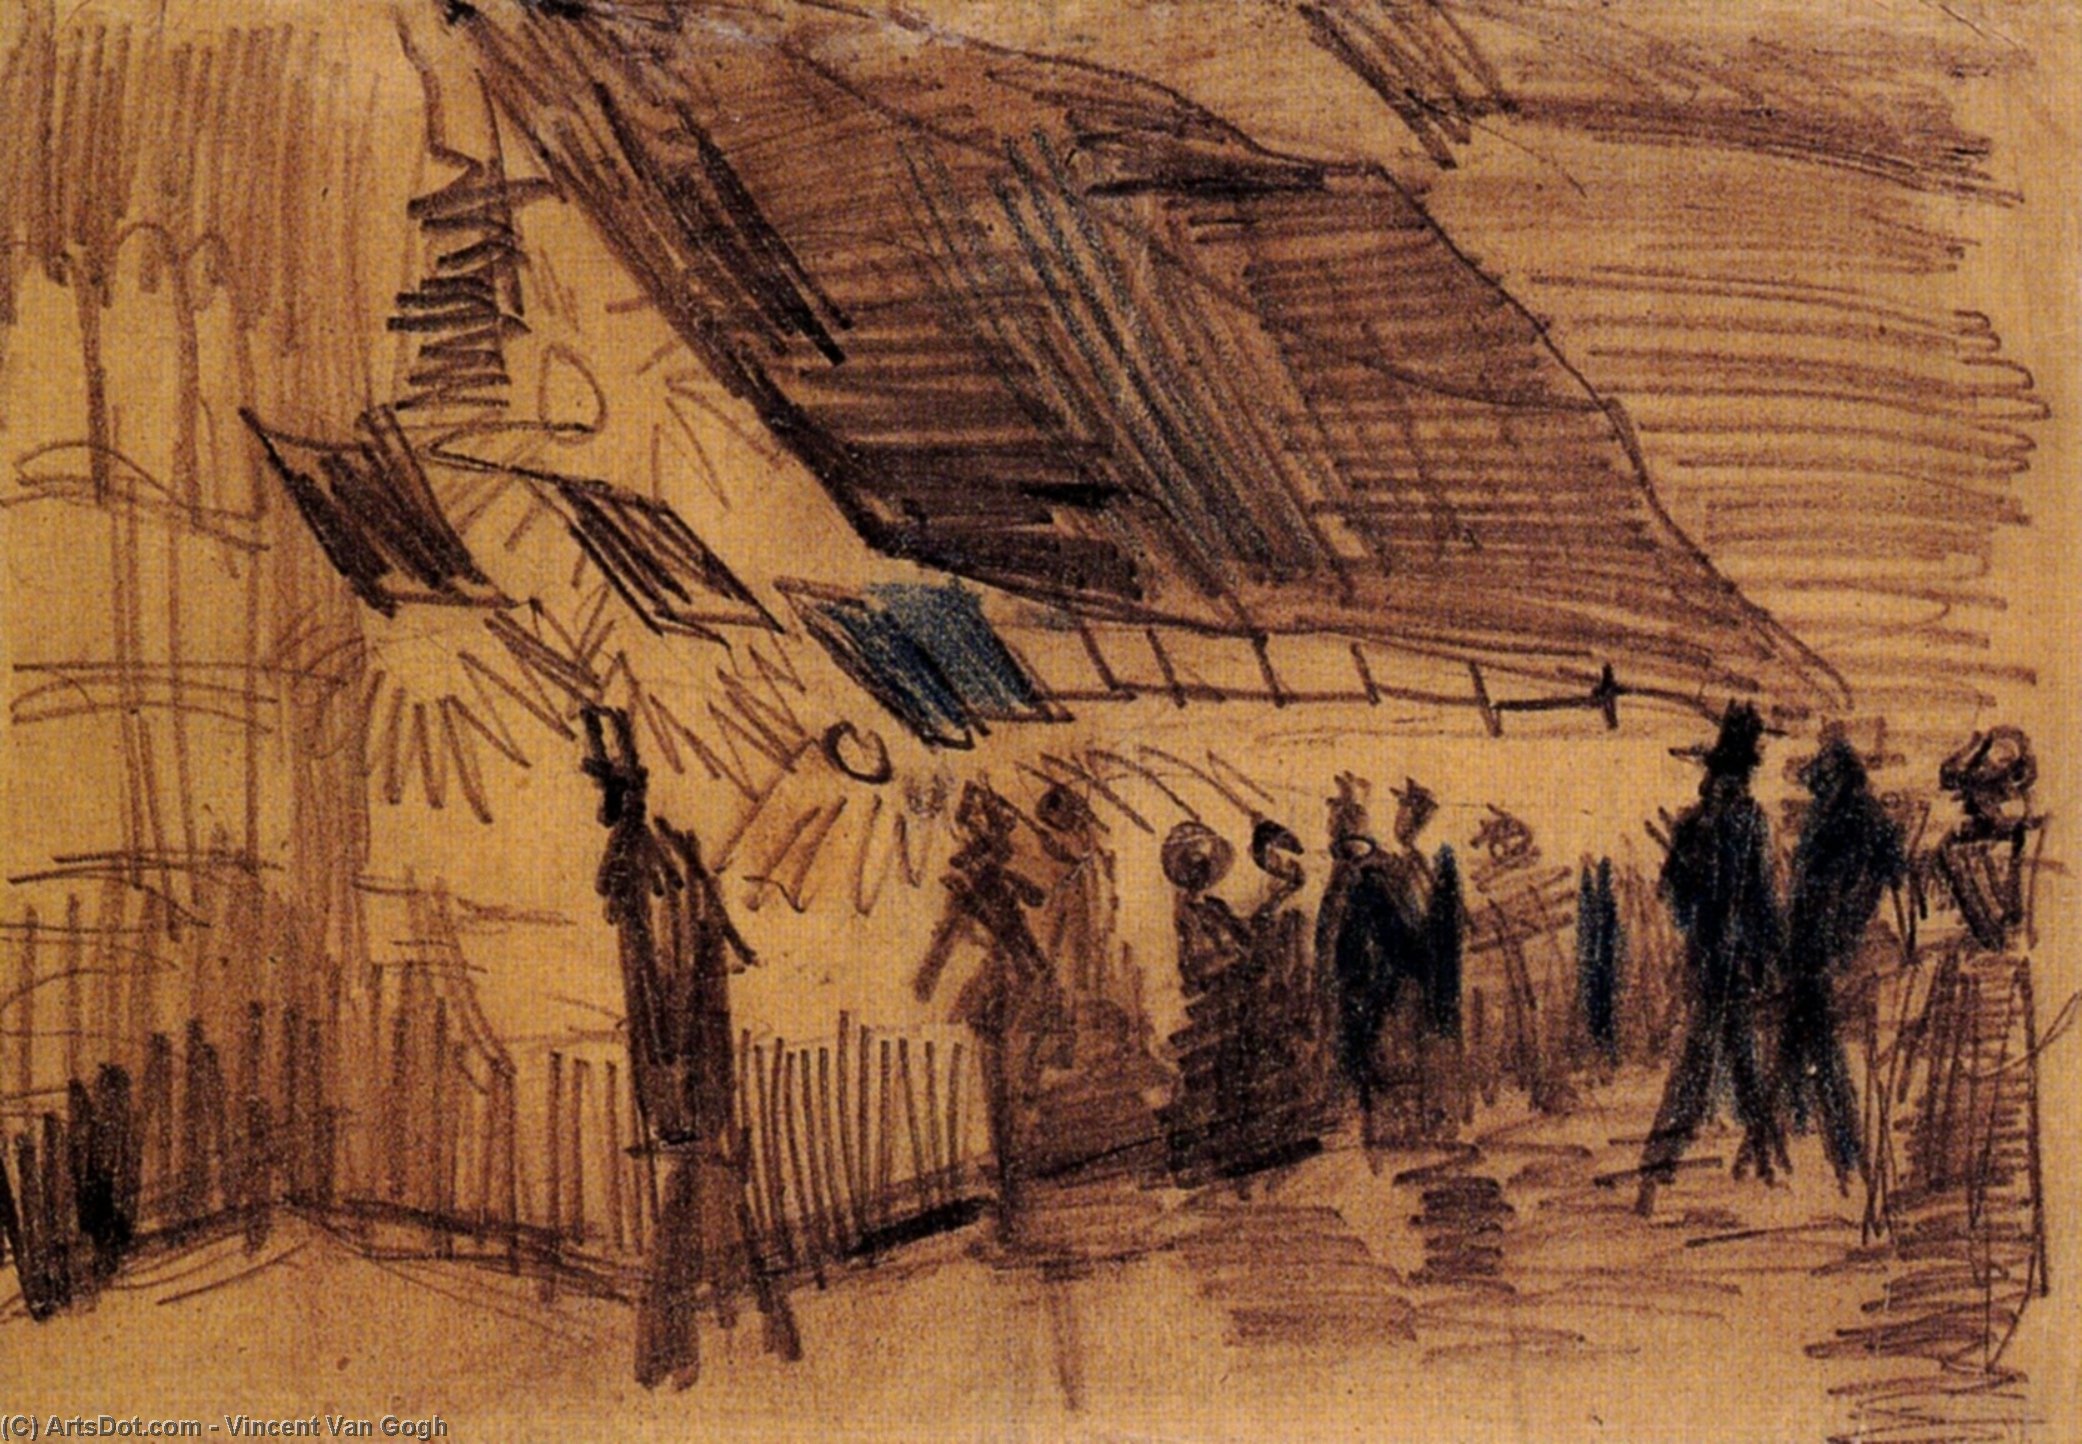 WikiOO.org - 백과 사전 - 회화, 삽화 Vincent Van Gogh - Strollers and Onlookers at a Place of Entertainment